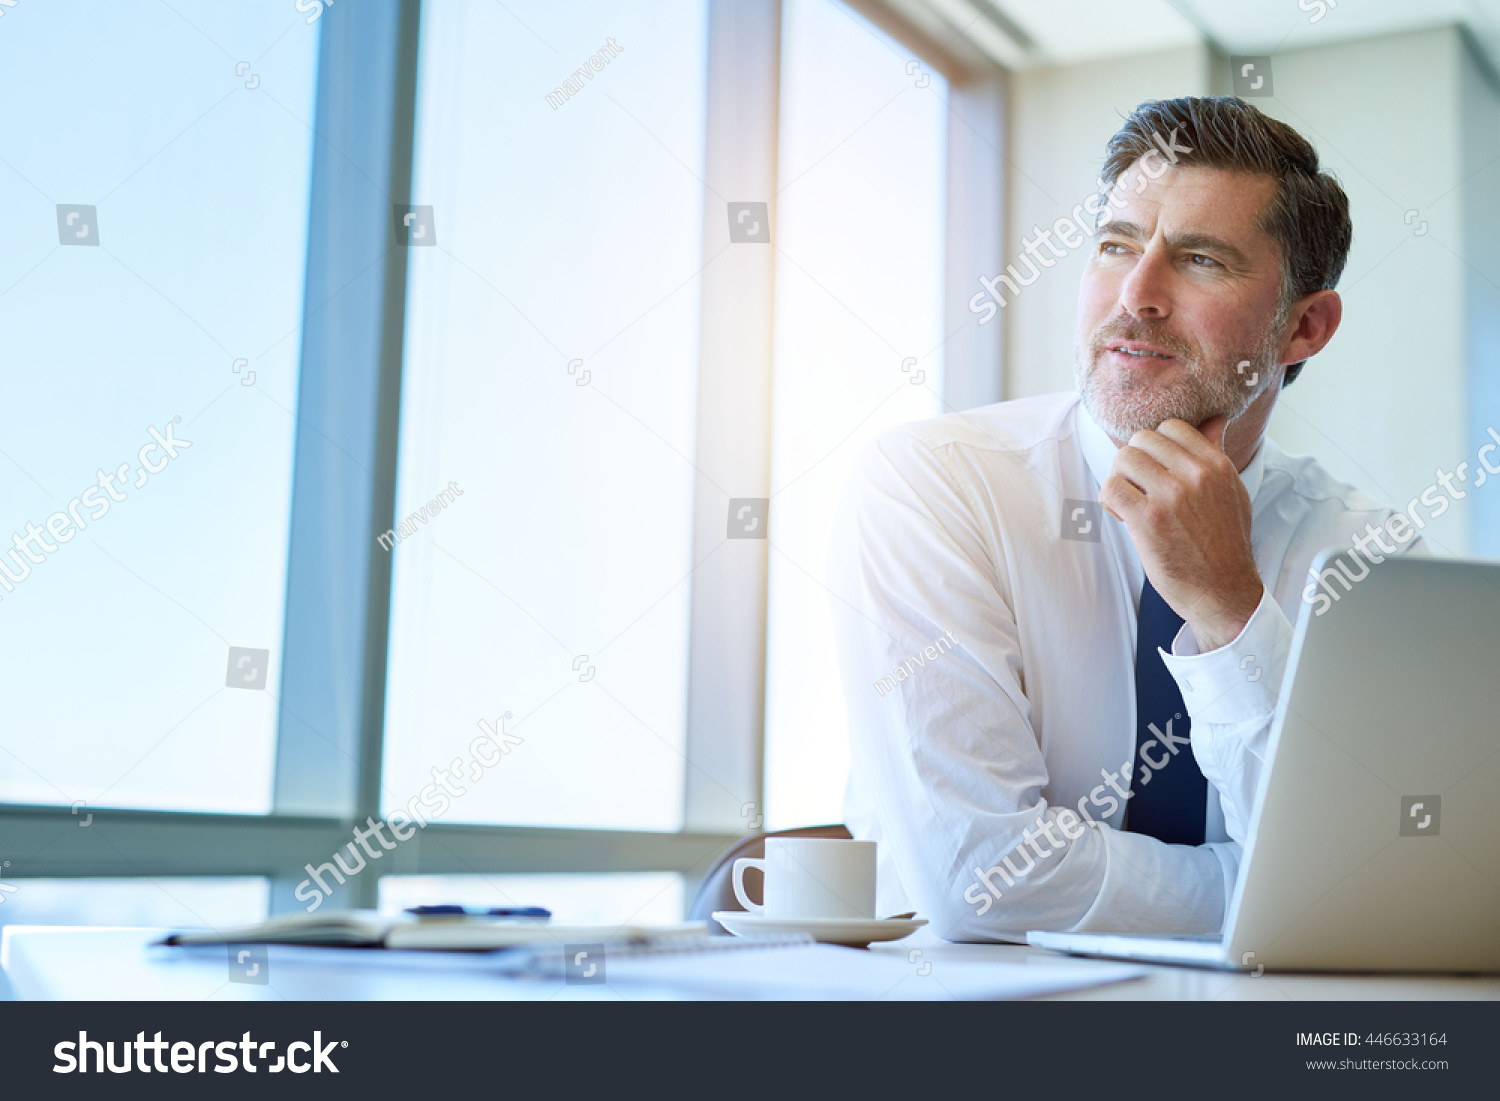 Attractive mature business executive with a stylish short beard, sitting at his office desk and looking out of his window with a thoughtful and optimistic expression #446633164